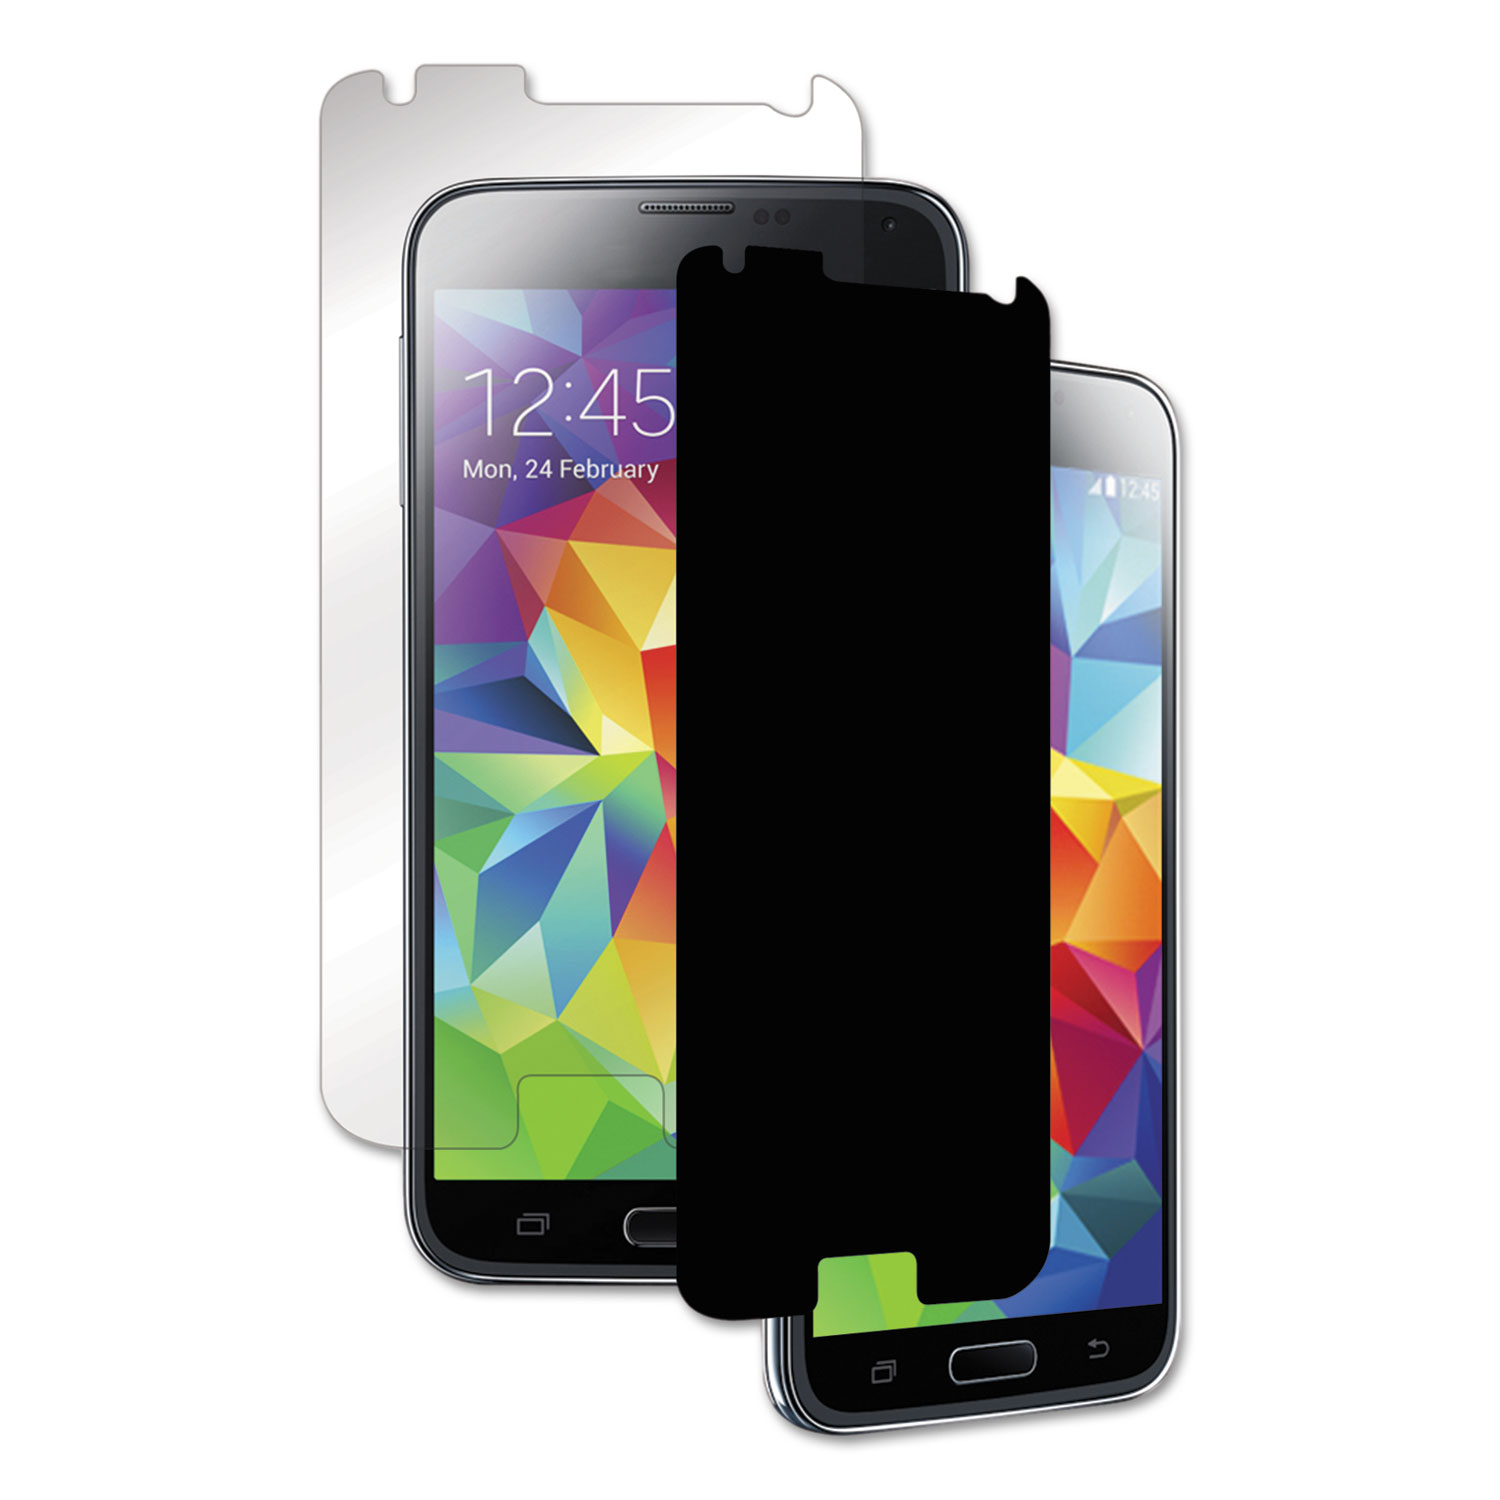 PrivaScreen Blackout Privacy Filter for Samsung Galaxy S5